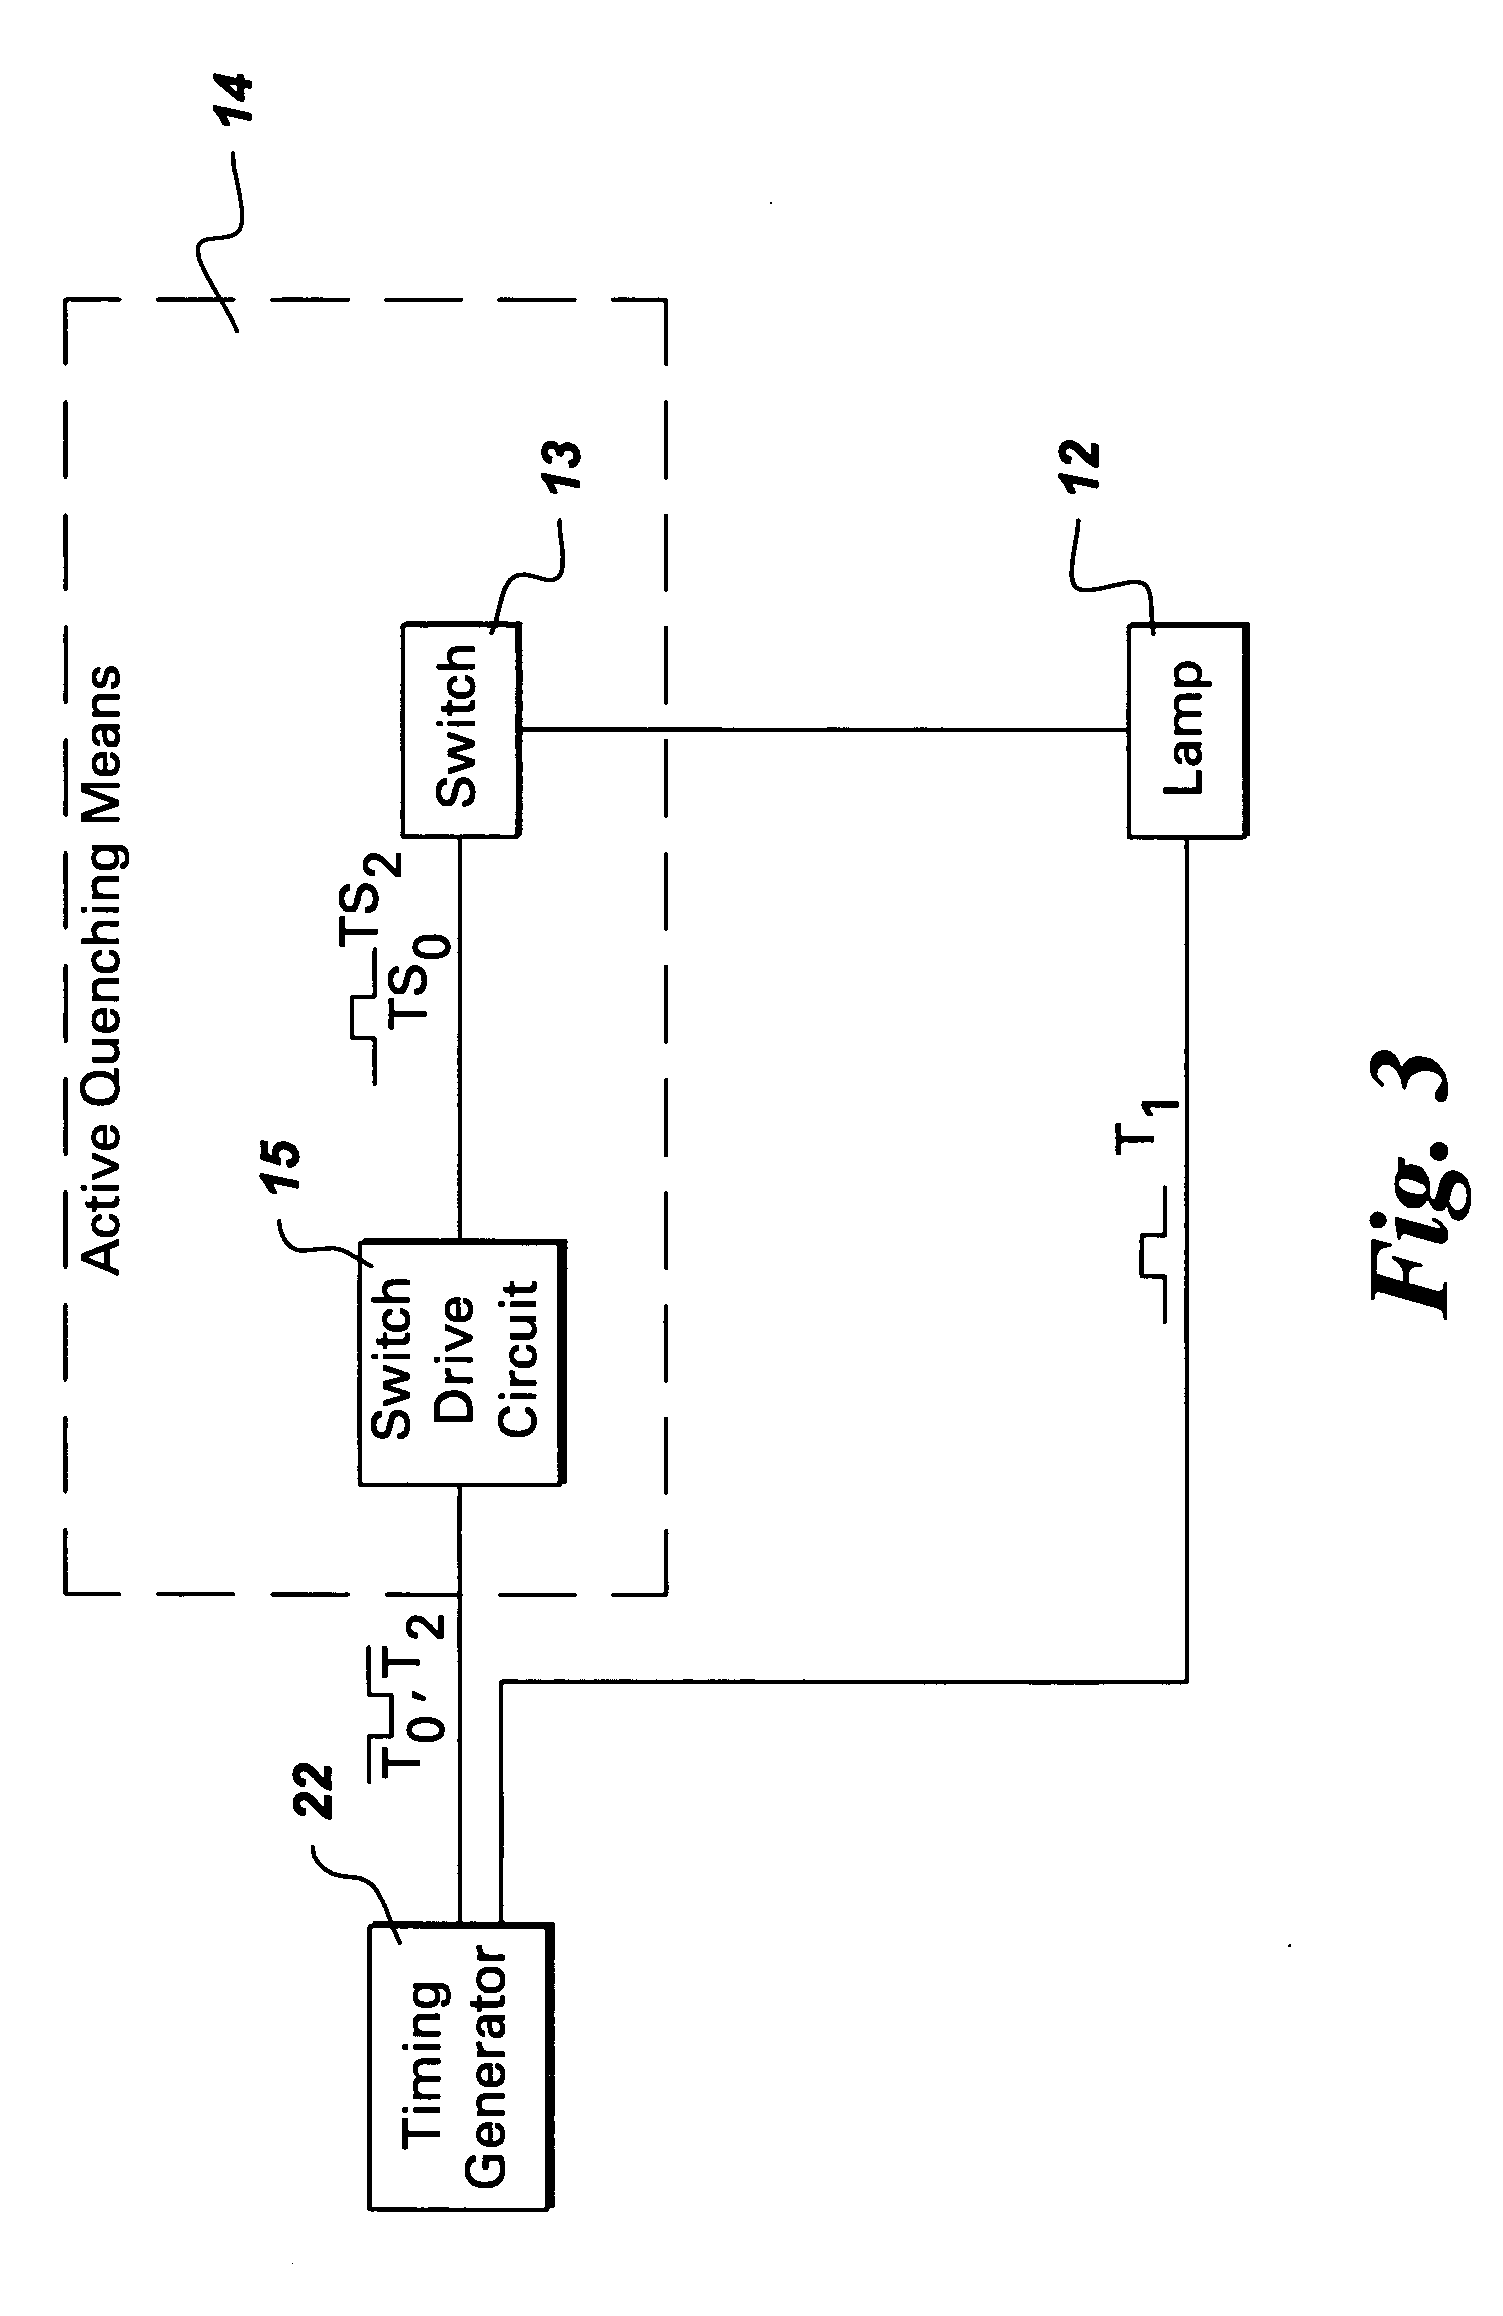 Actively quenched lamp, infrared thermography imaging system, and method for actively controlling flash duration